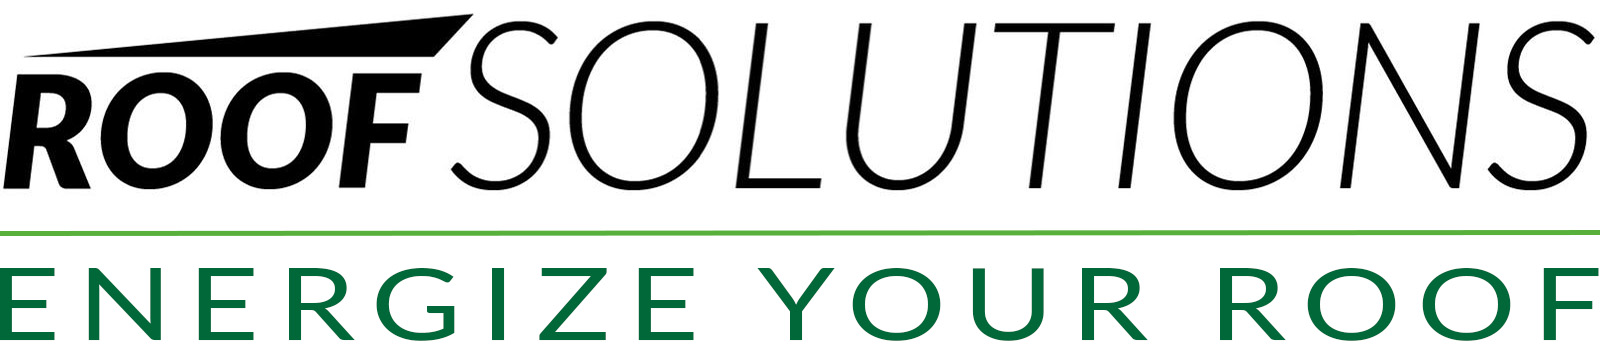 ROOFSolutions Logo